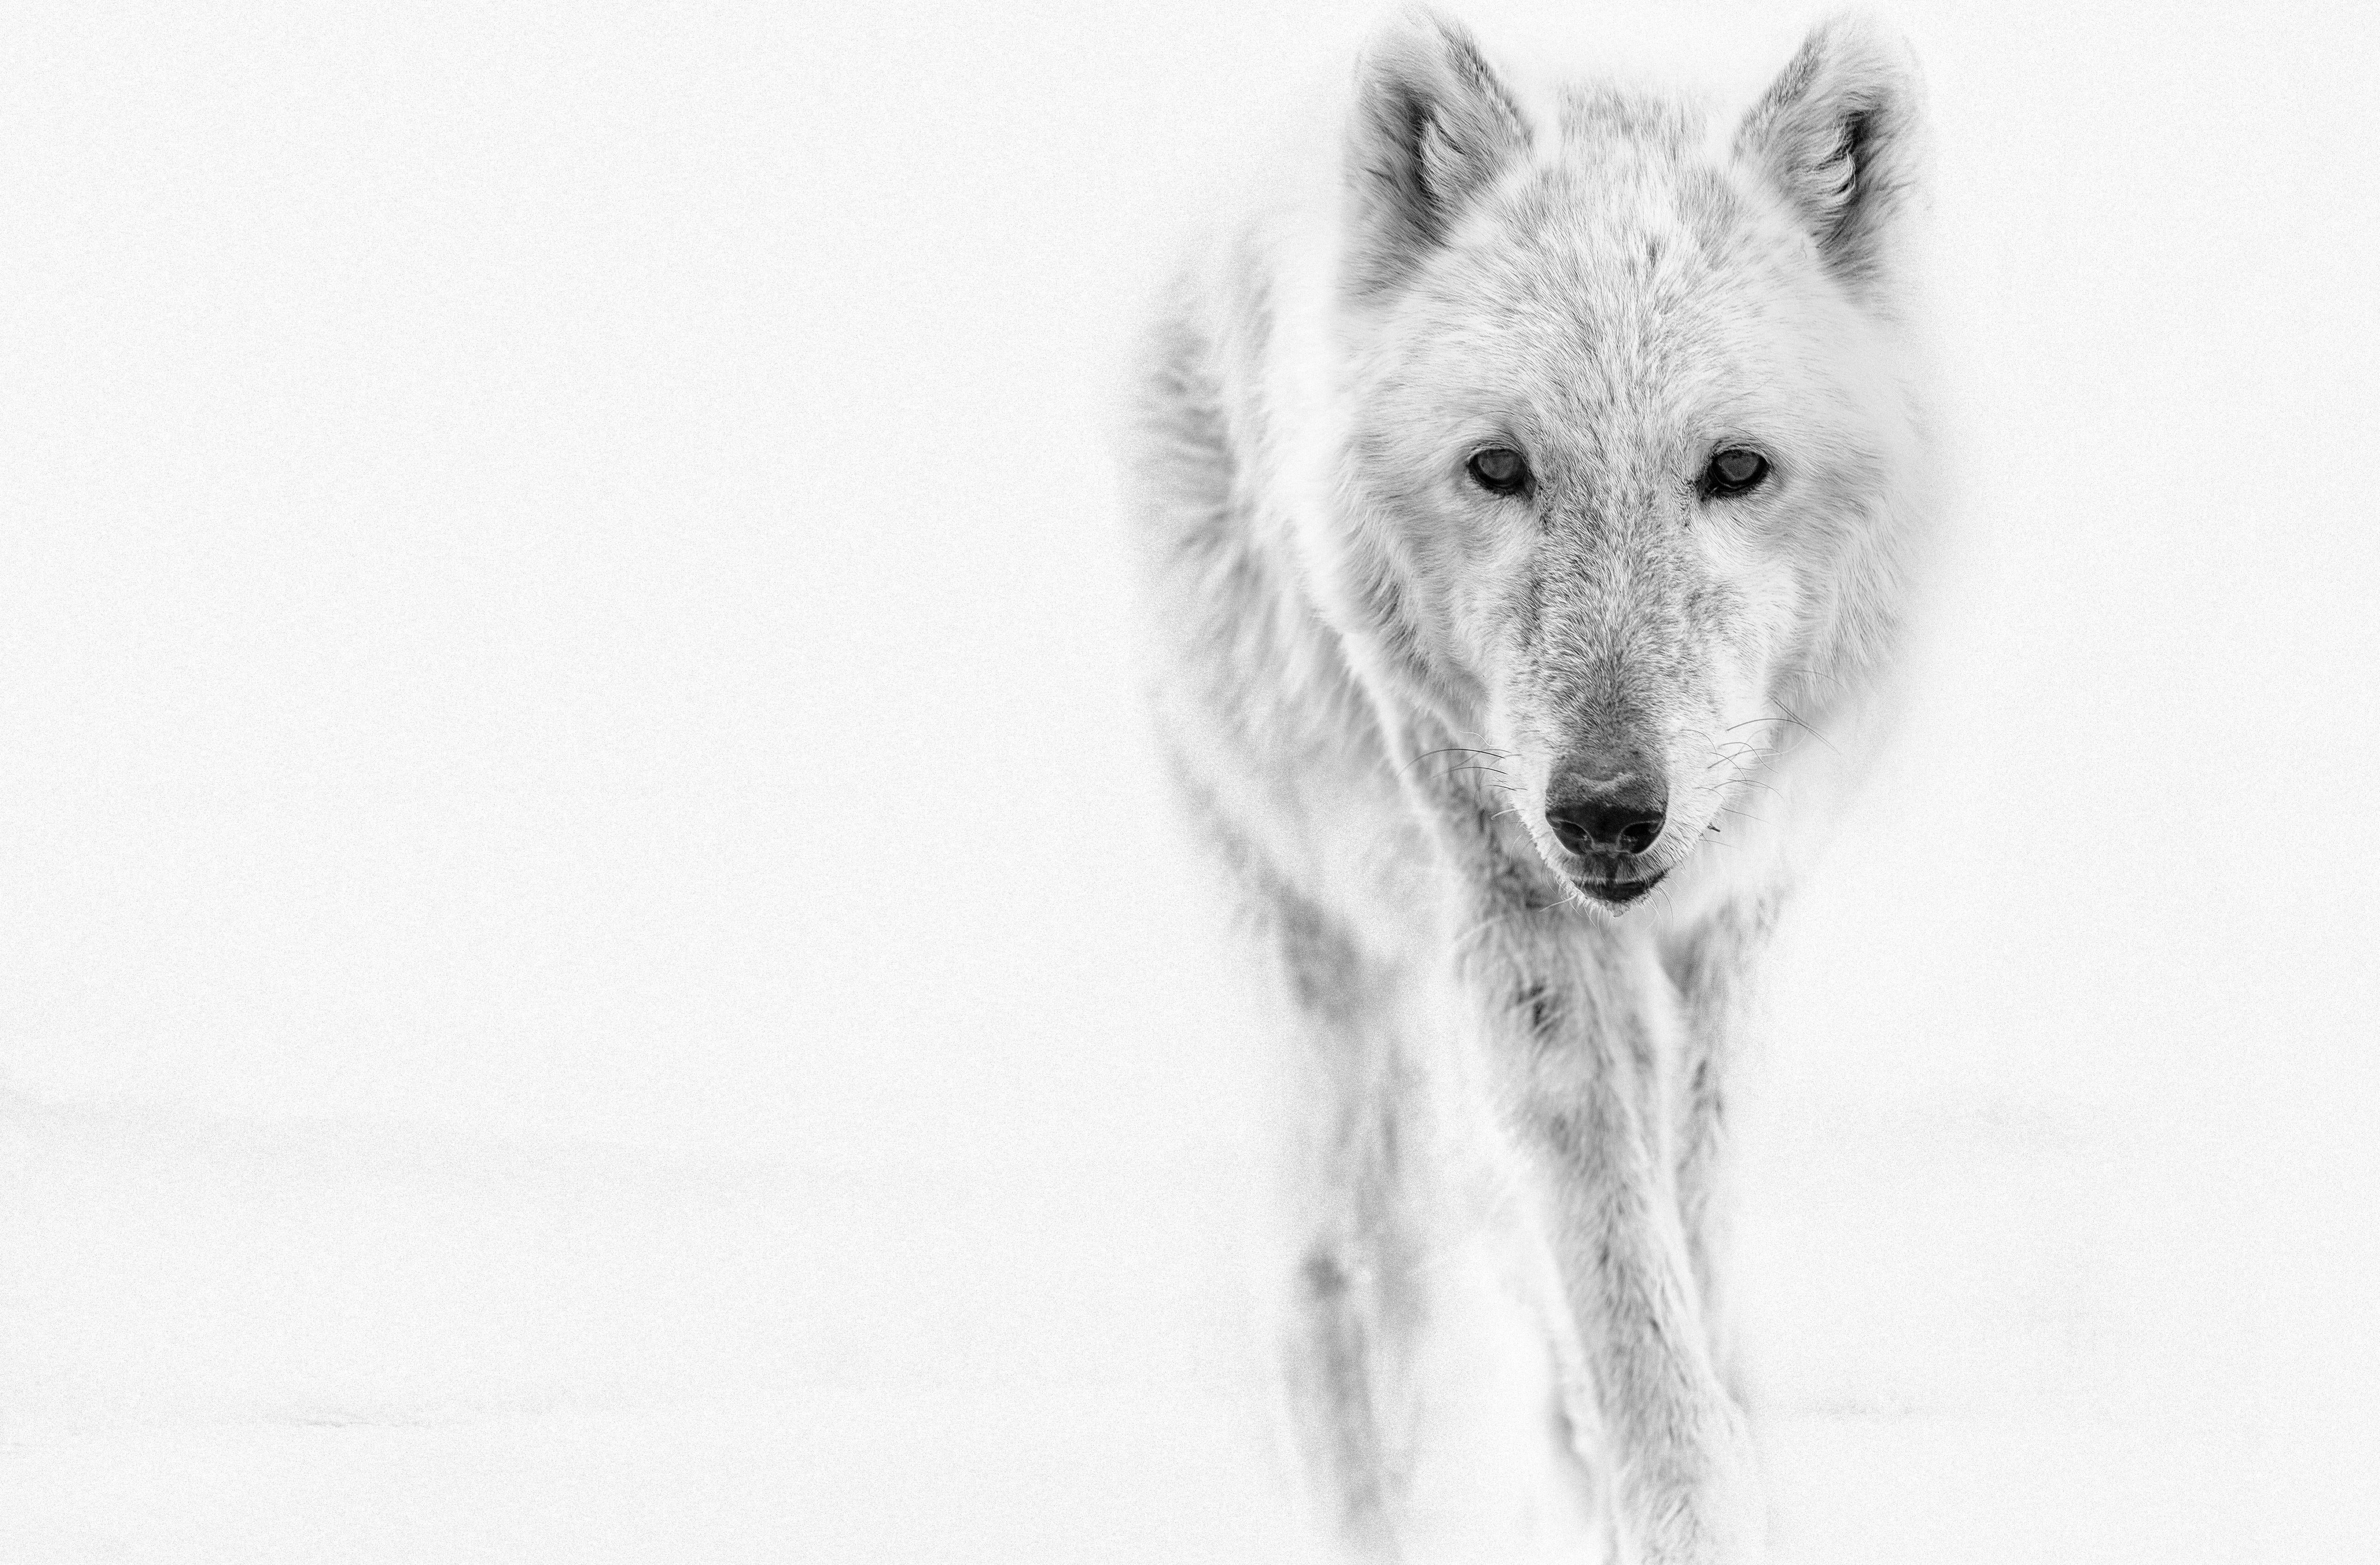 Shane Russeck Animal Print - "Arctic Wolf" 40x60  Black and White Photography, Wolves Photograph Fine Art